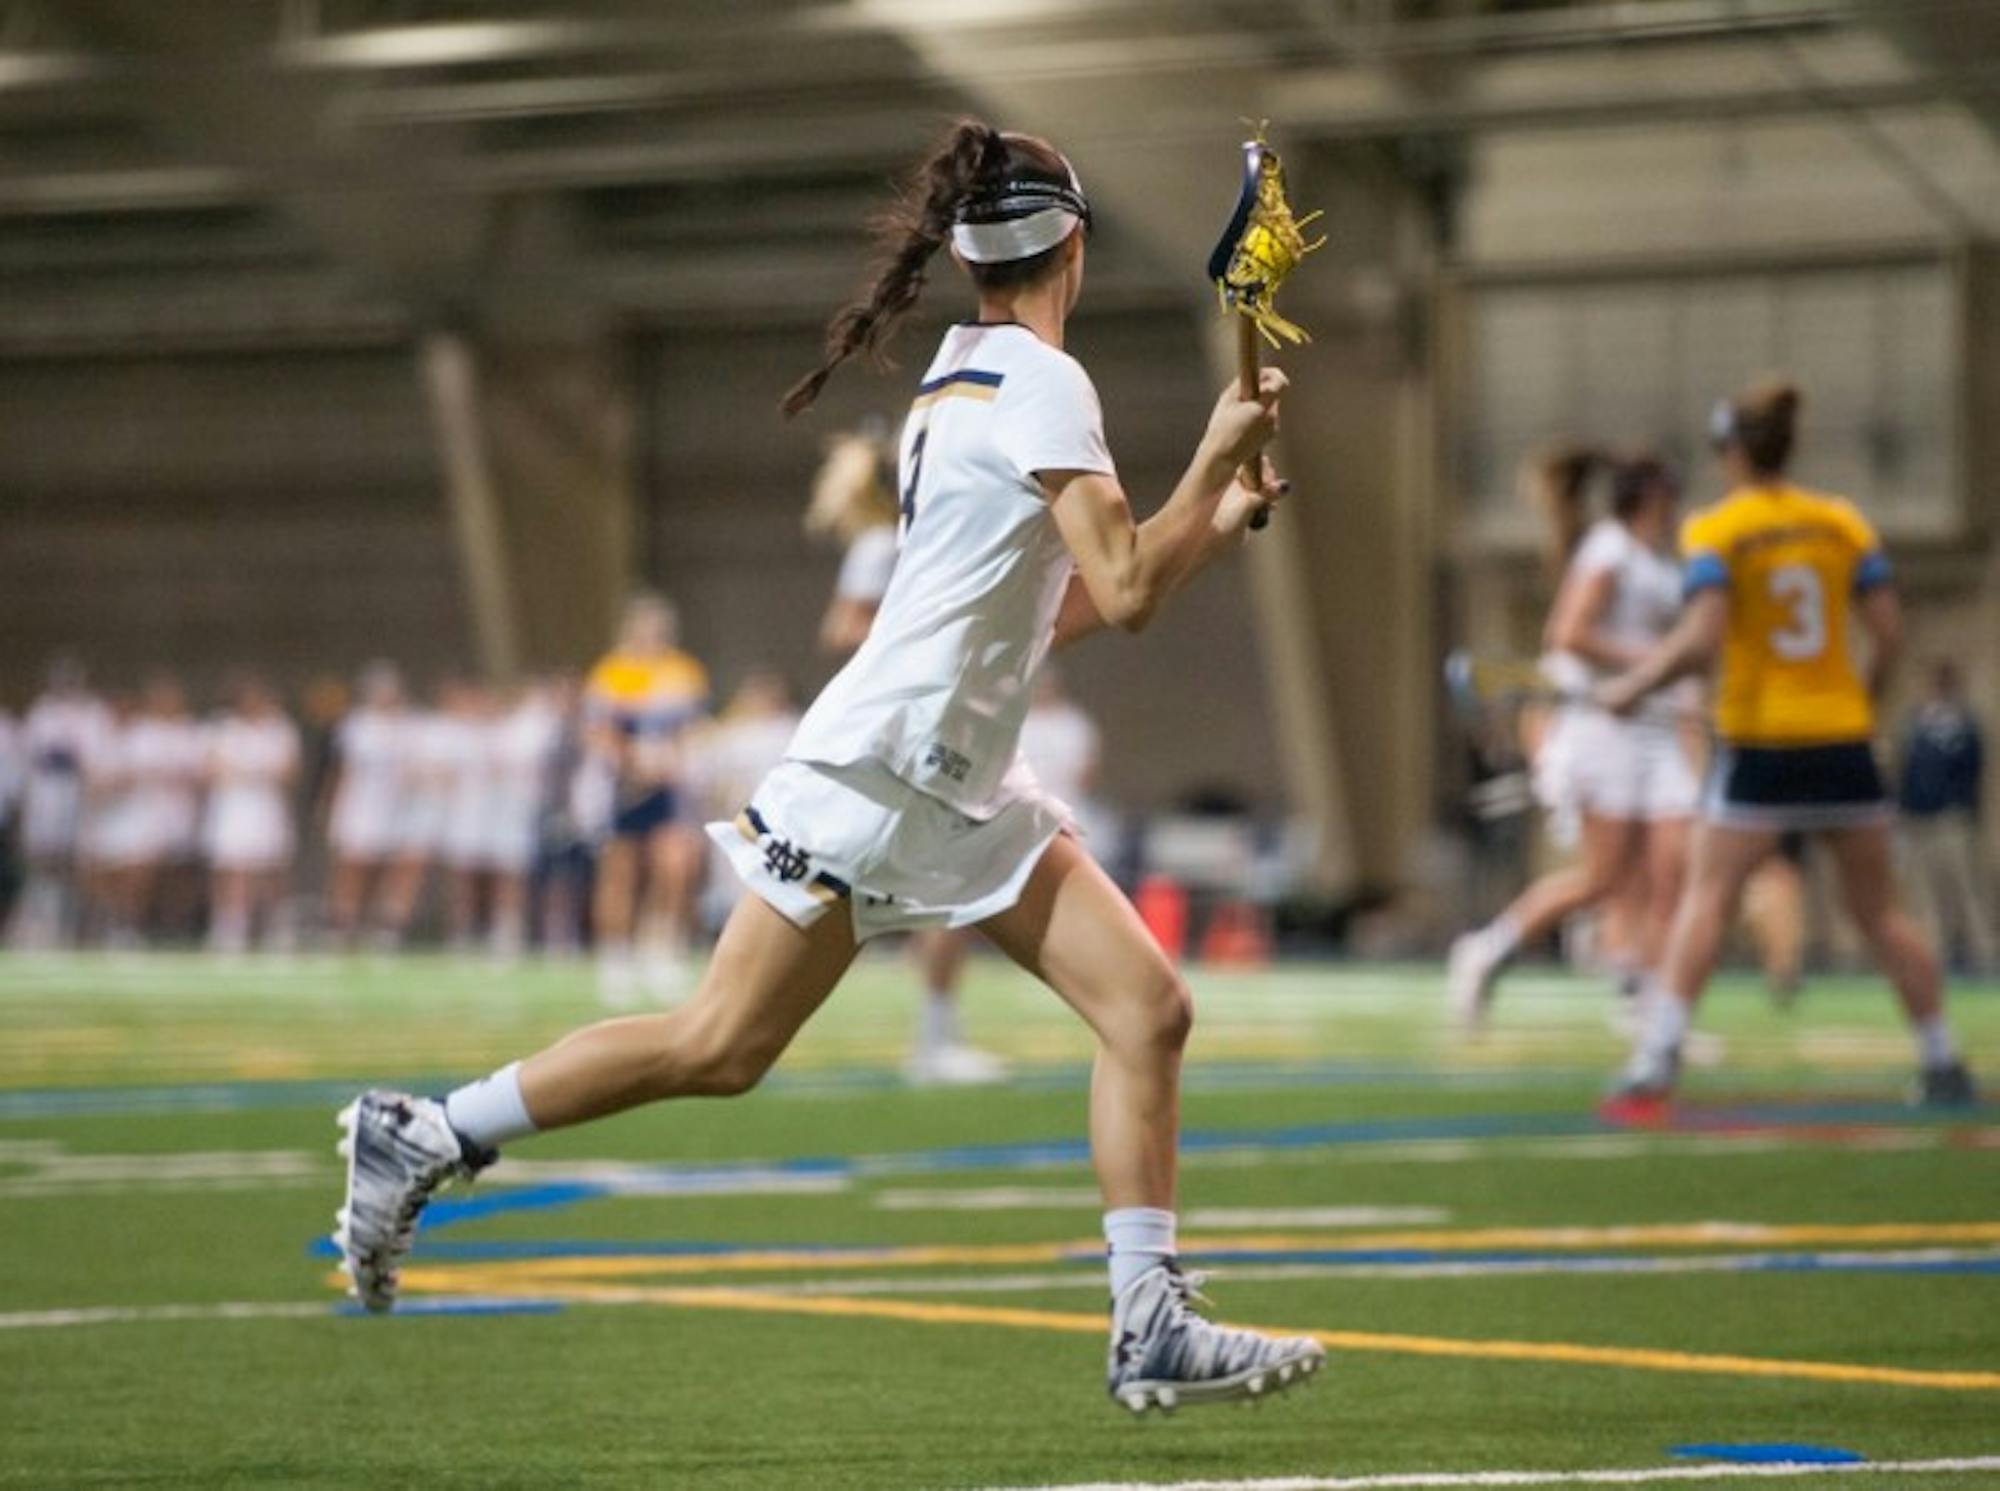 Irish sophomore attack Nikki Ortega cradles the ball during Notre Dame’s 21-9 win over Marquette on Tuesday. Ortega scored a career high seven points in the game.